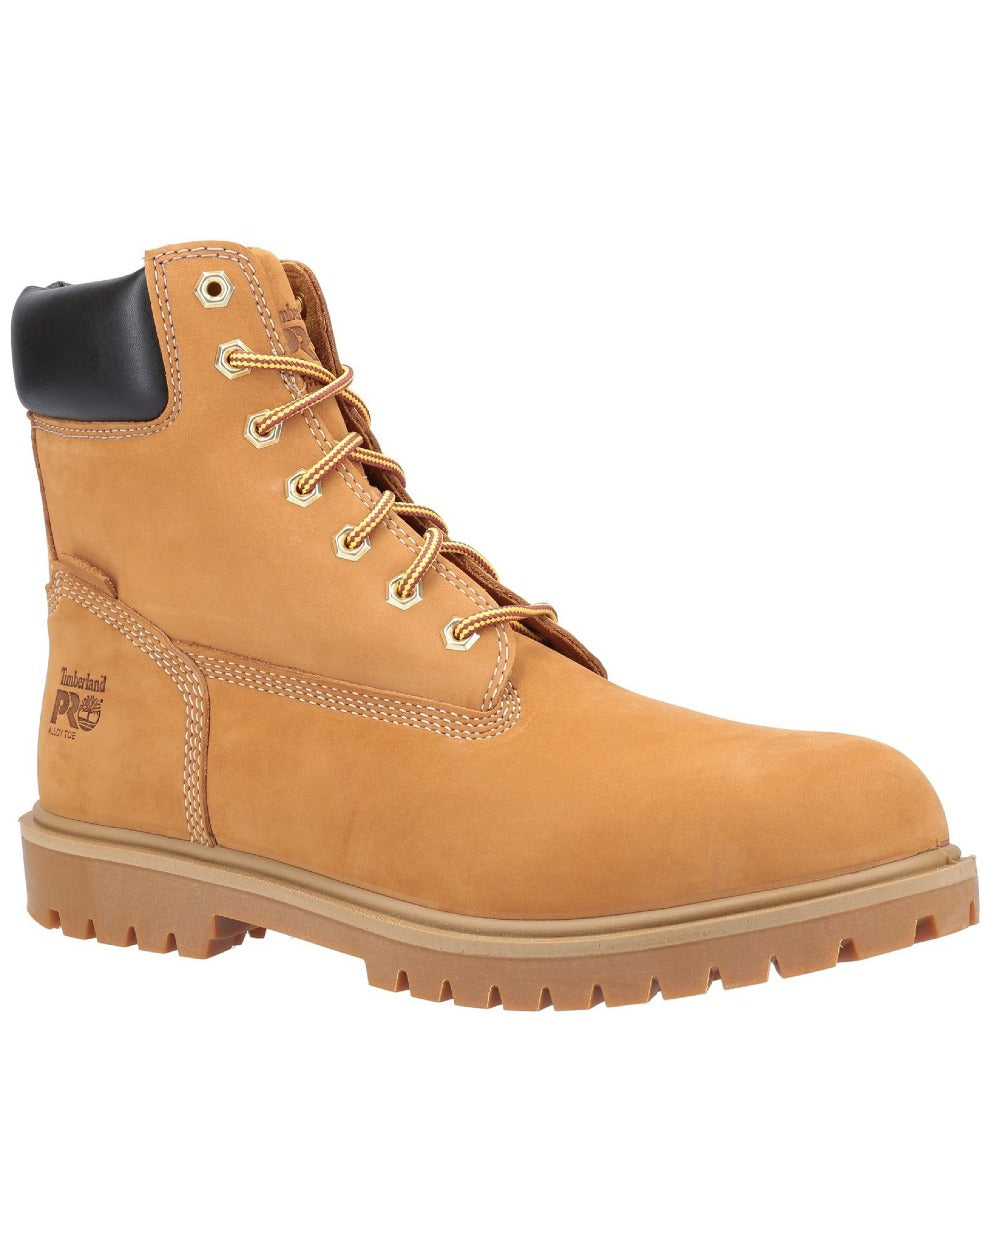 Wheat coloured Timberland Pro Iconic Safety Toe Work Boots on white background 